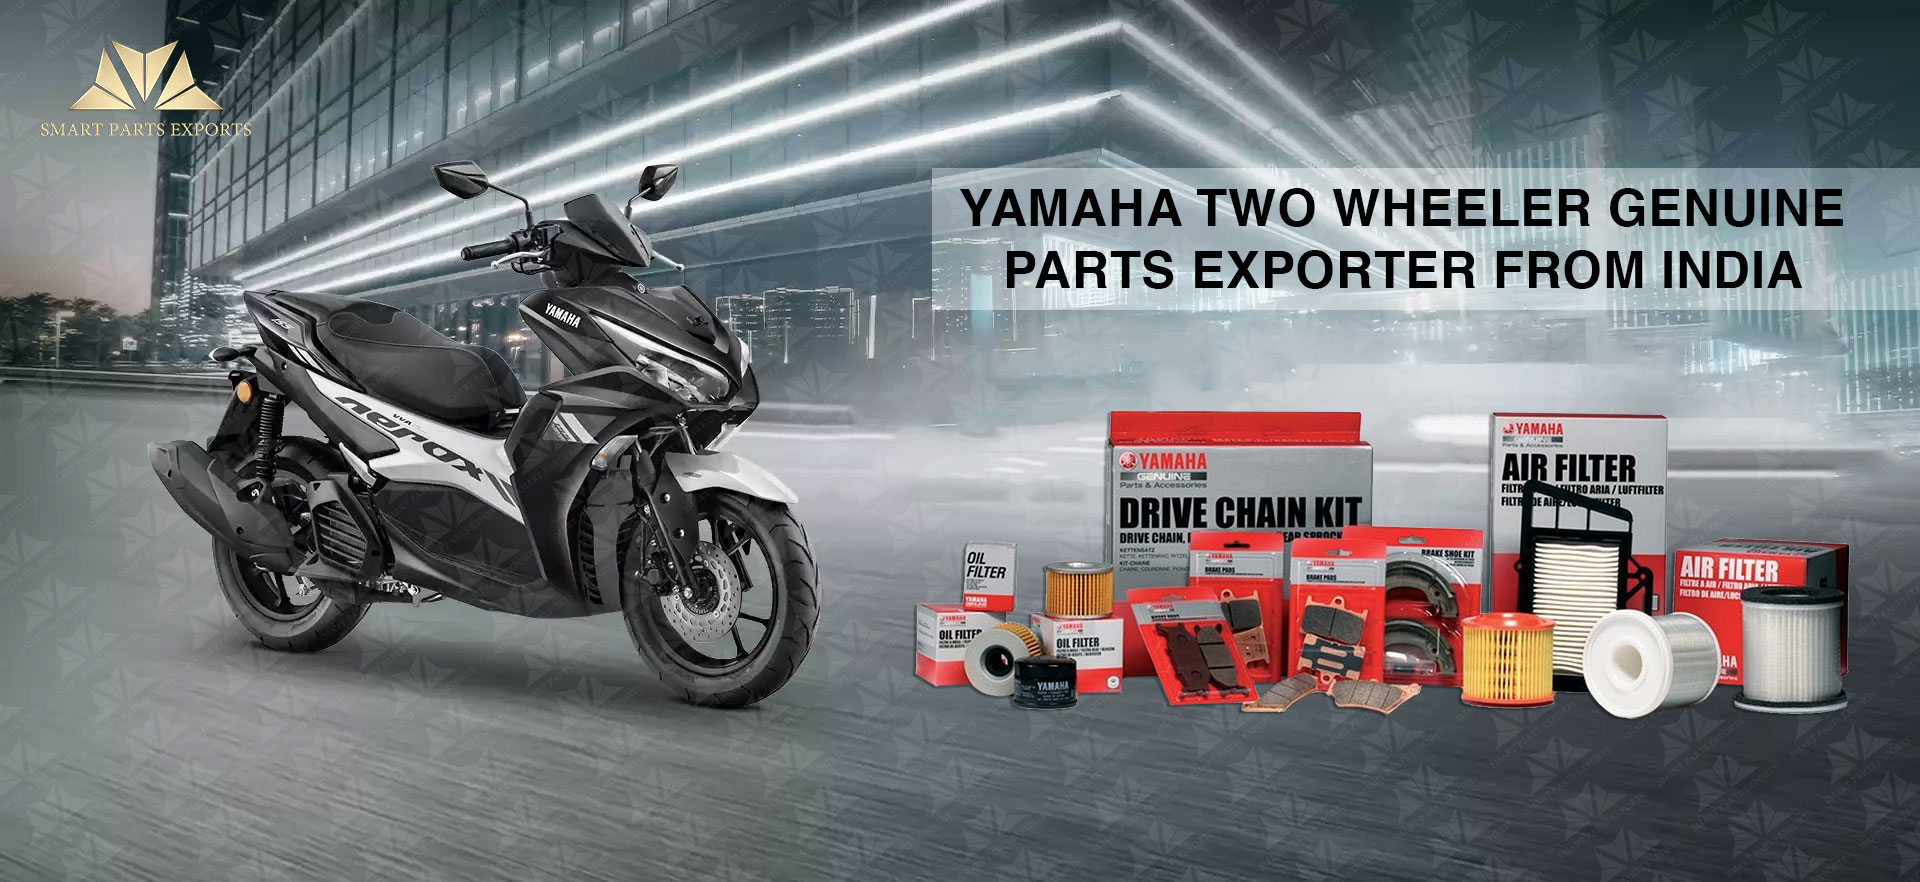 Yamaha Two Wheeler Genuine Parts Exporter from India